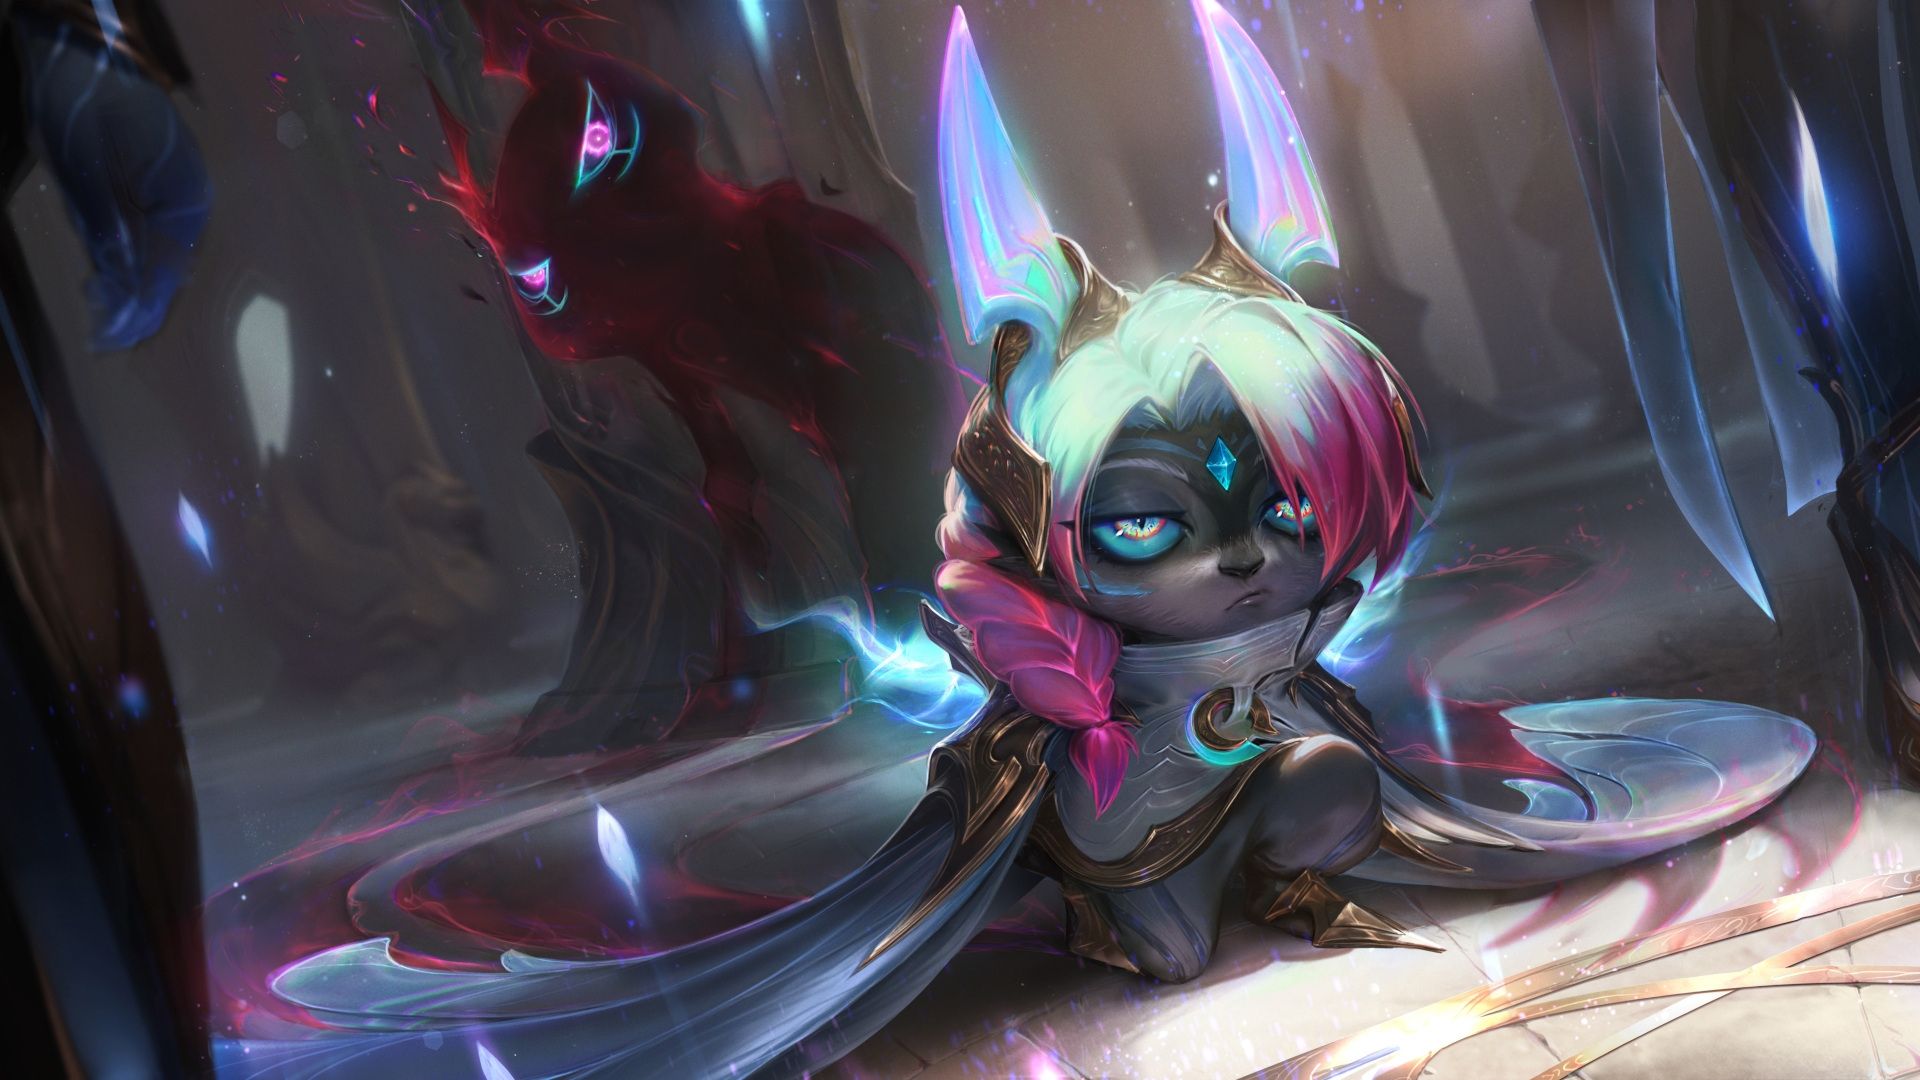 The tweet sent in 2021 started speculations about a Billie Eilish League of Legends collab, fans are still wondering if there's a possibility for that to happen in 2022.